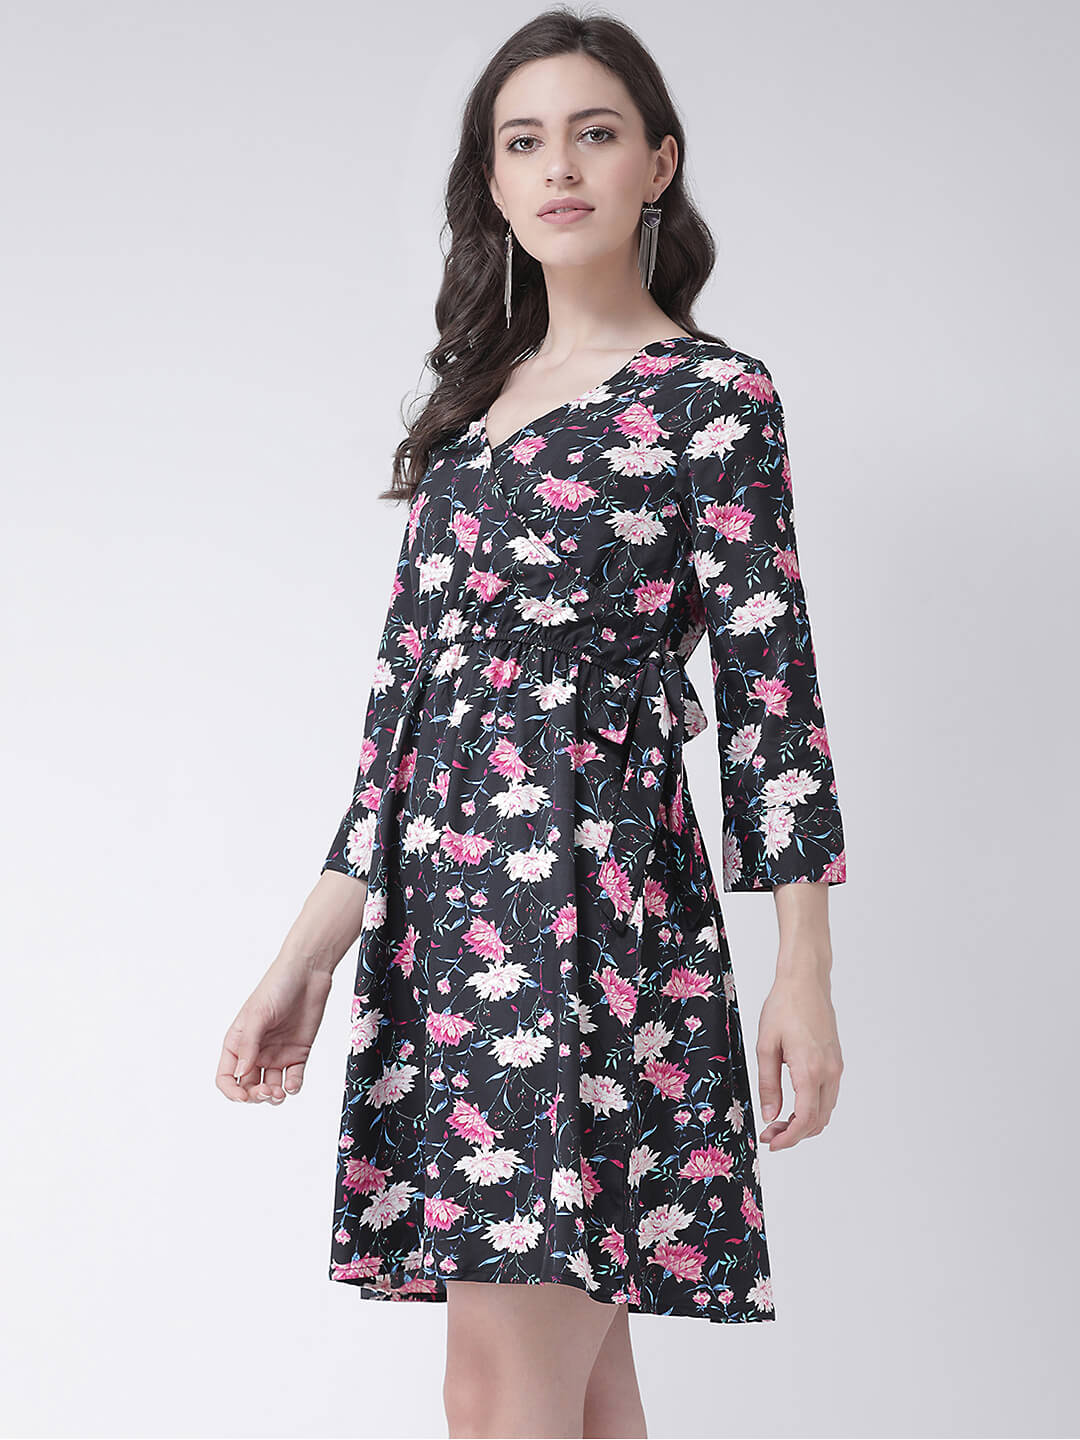 Msfq Women'S Printed Fit And Flare Dress